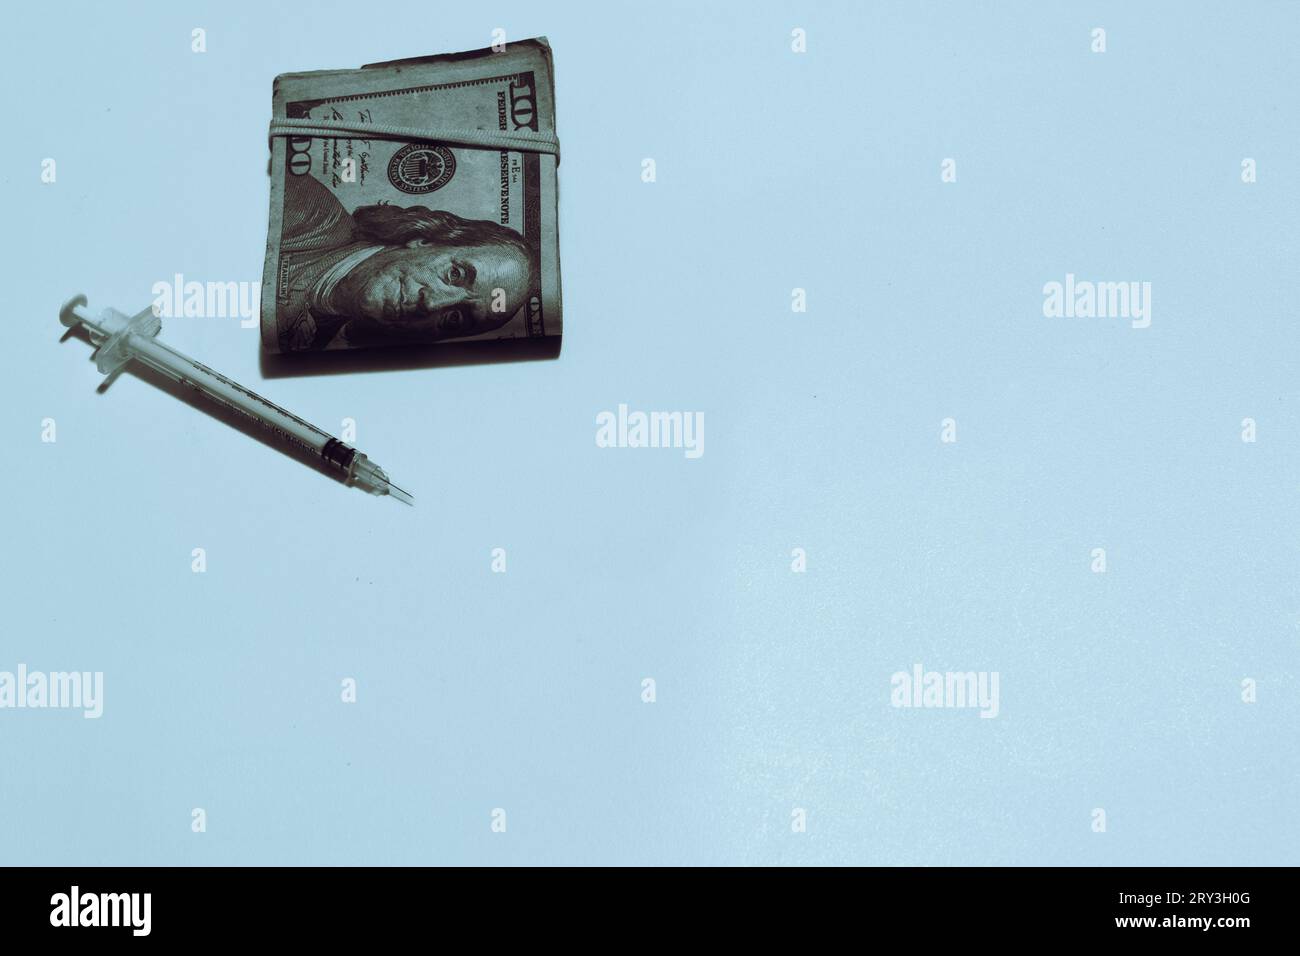 Drug syringe and money on white background with copy space to the right side. Stock Photo